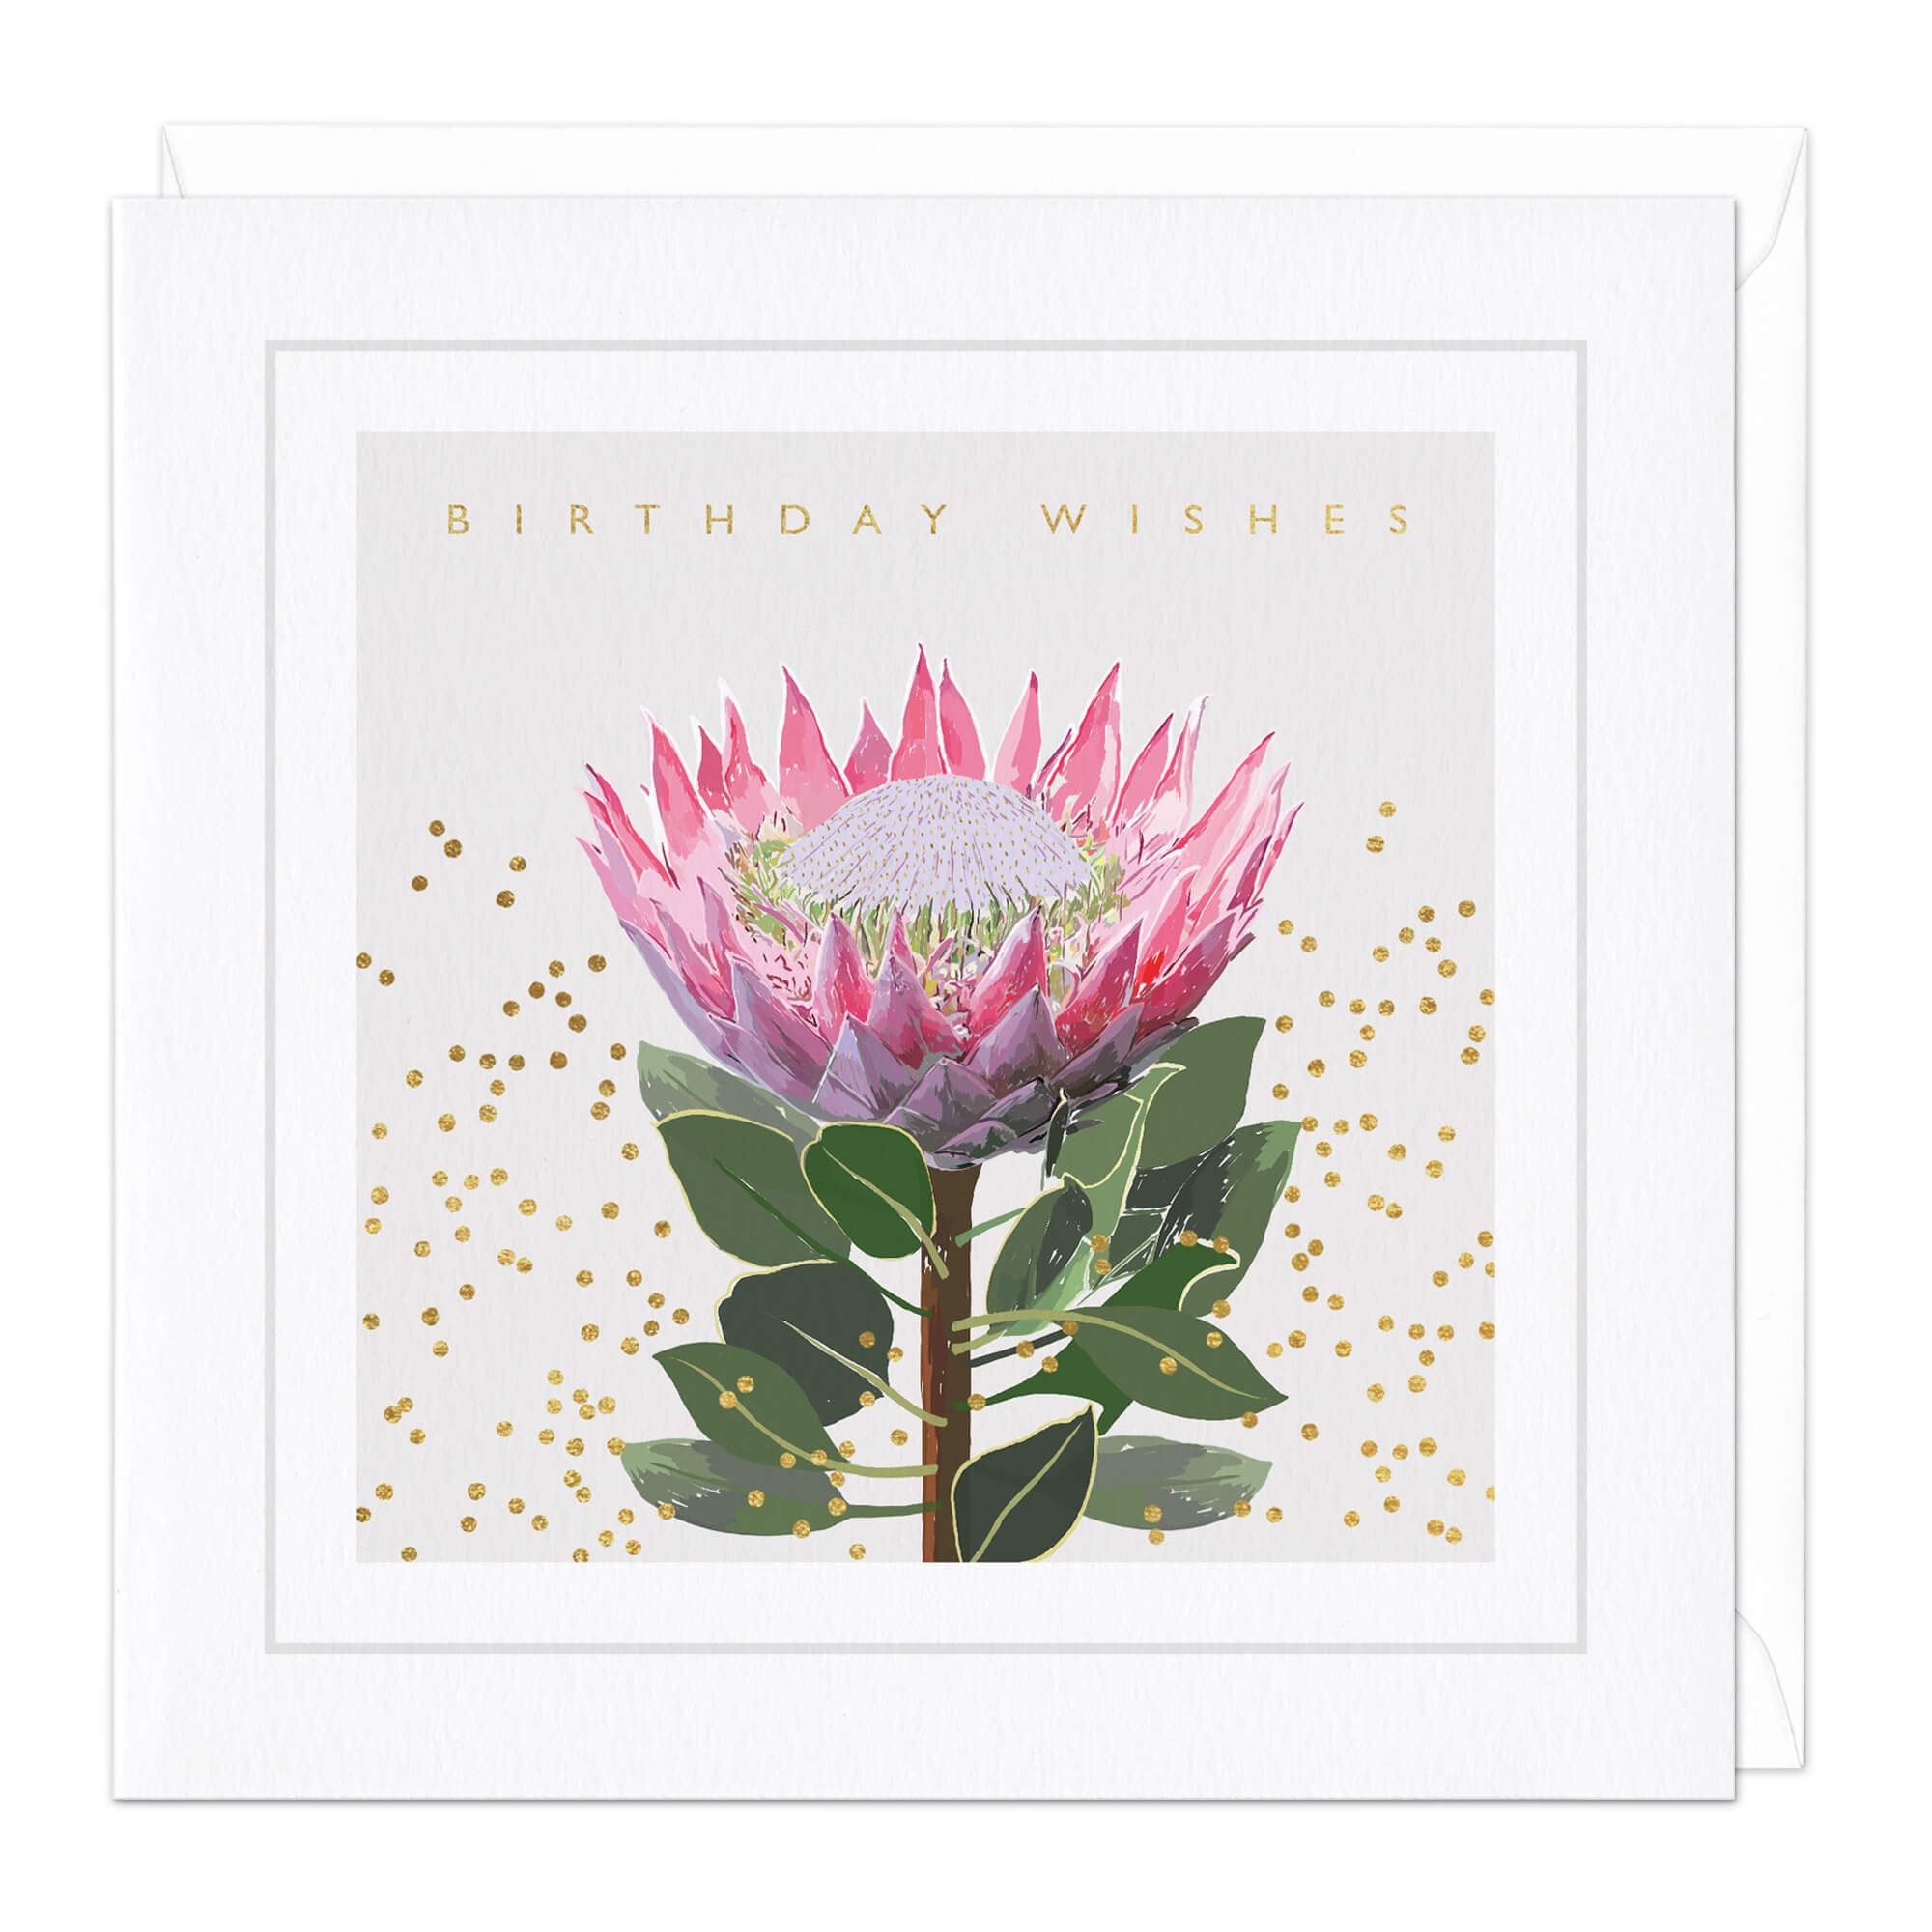 Protea Flower Birthday Wishes Card